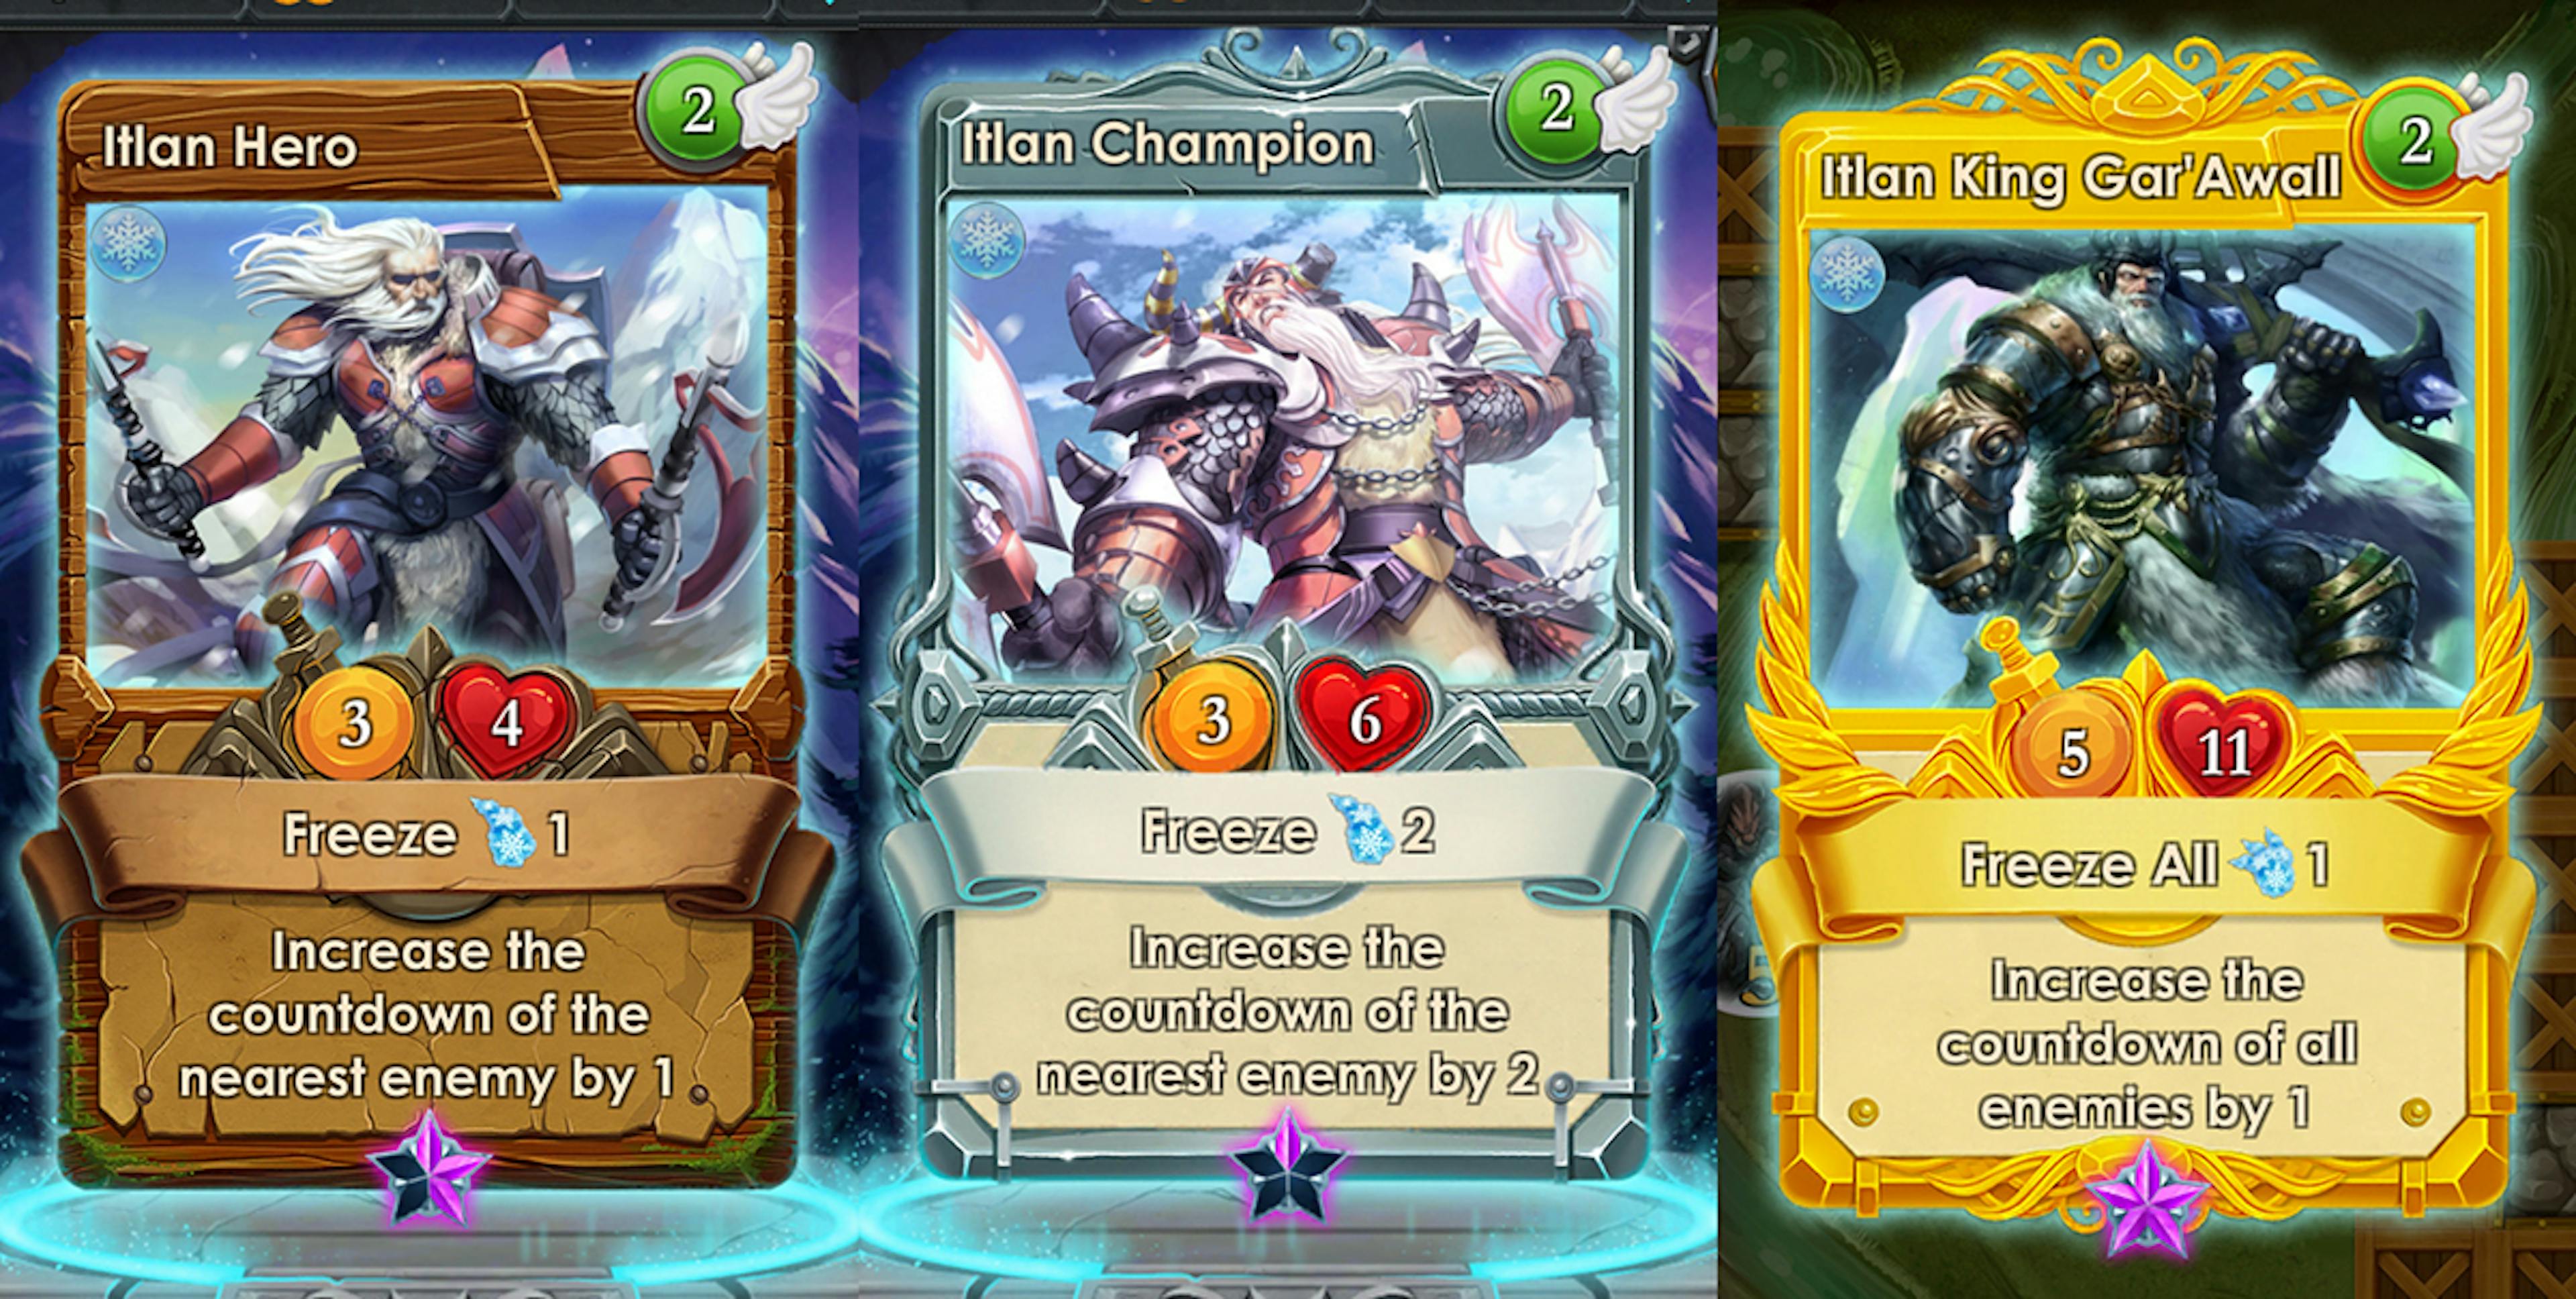 Some heroes can cast spells to help players take on opponents during battles.